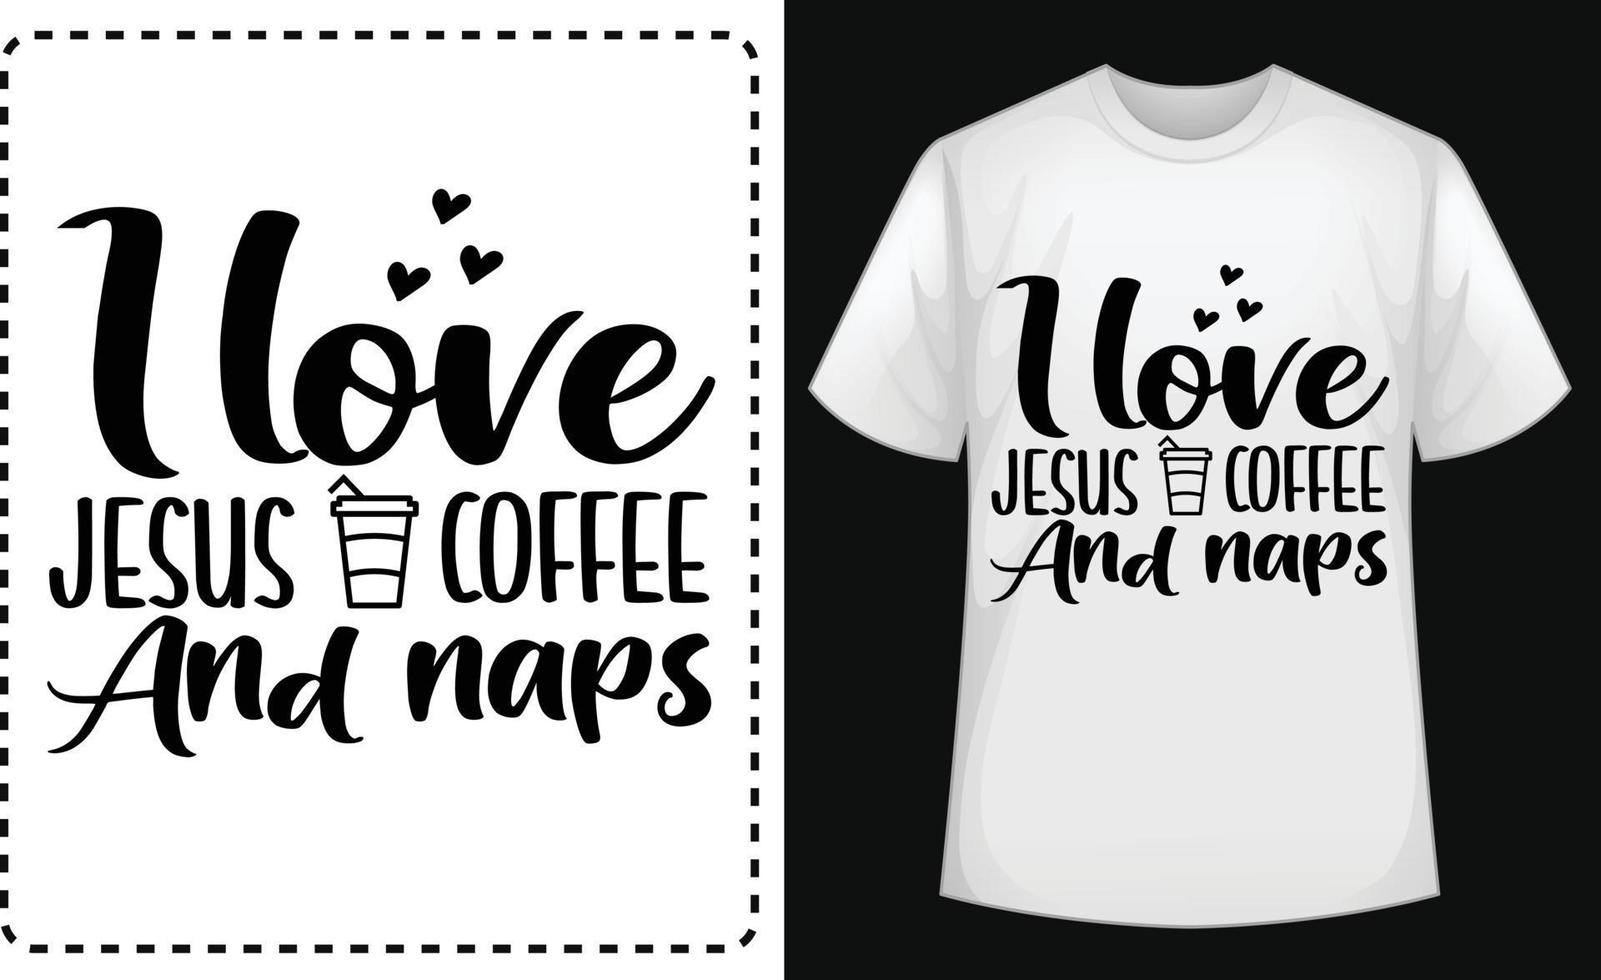 I love Jesus coffee and naps typographic t shirt design vector for free